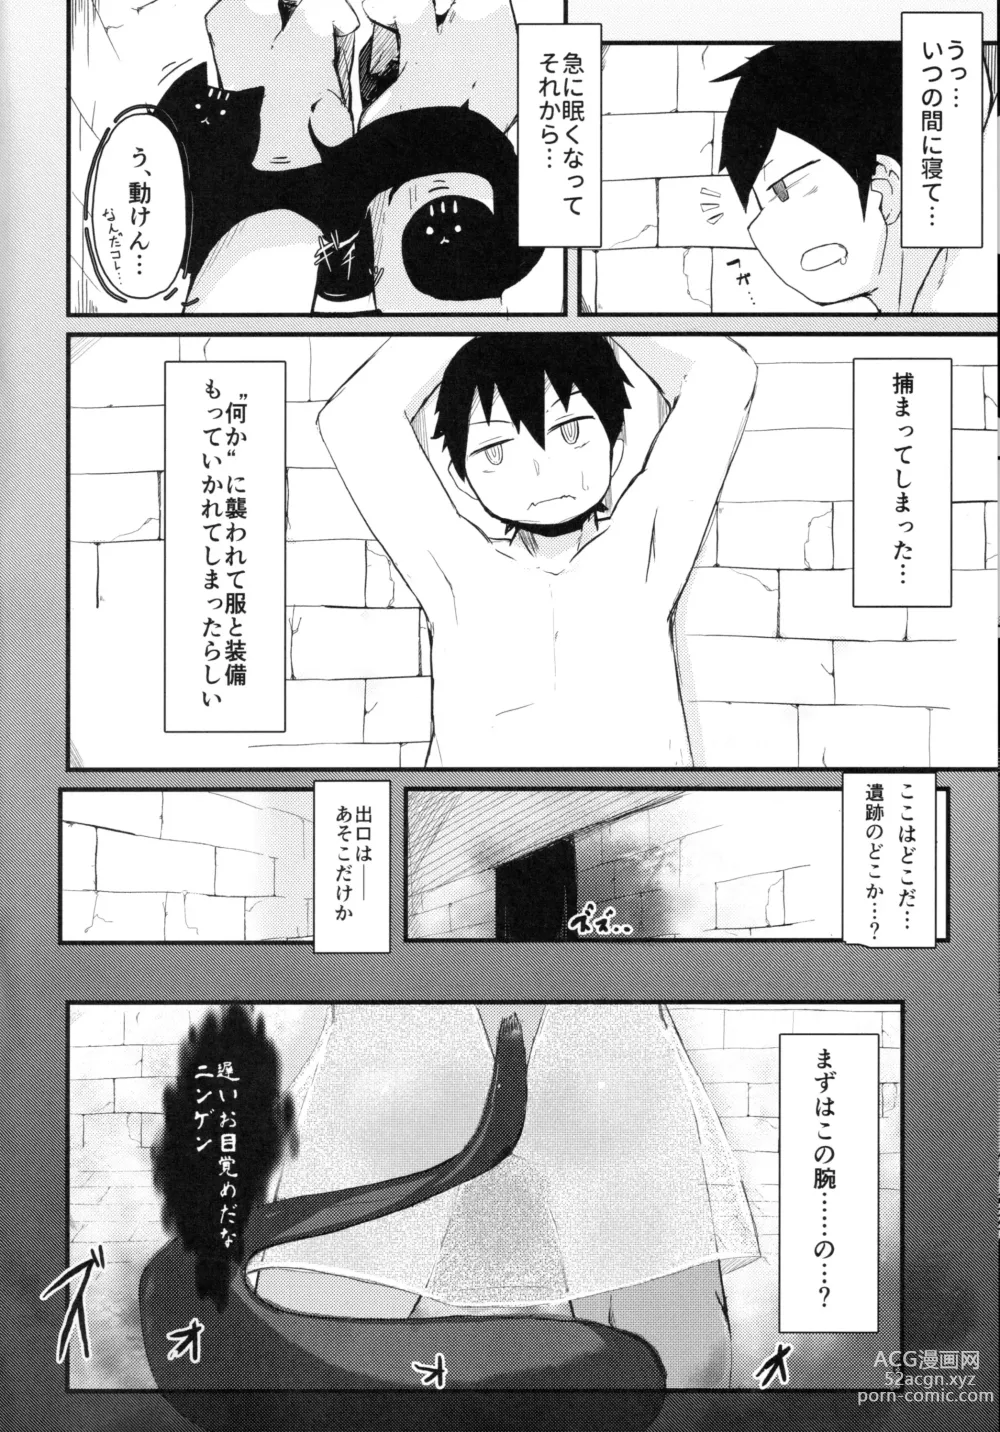 Page 6 of doujinshi Hamunnyaptra -The Lost City of Cats-